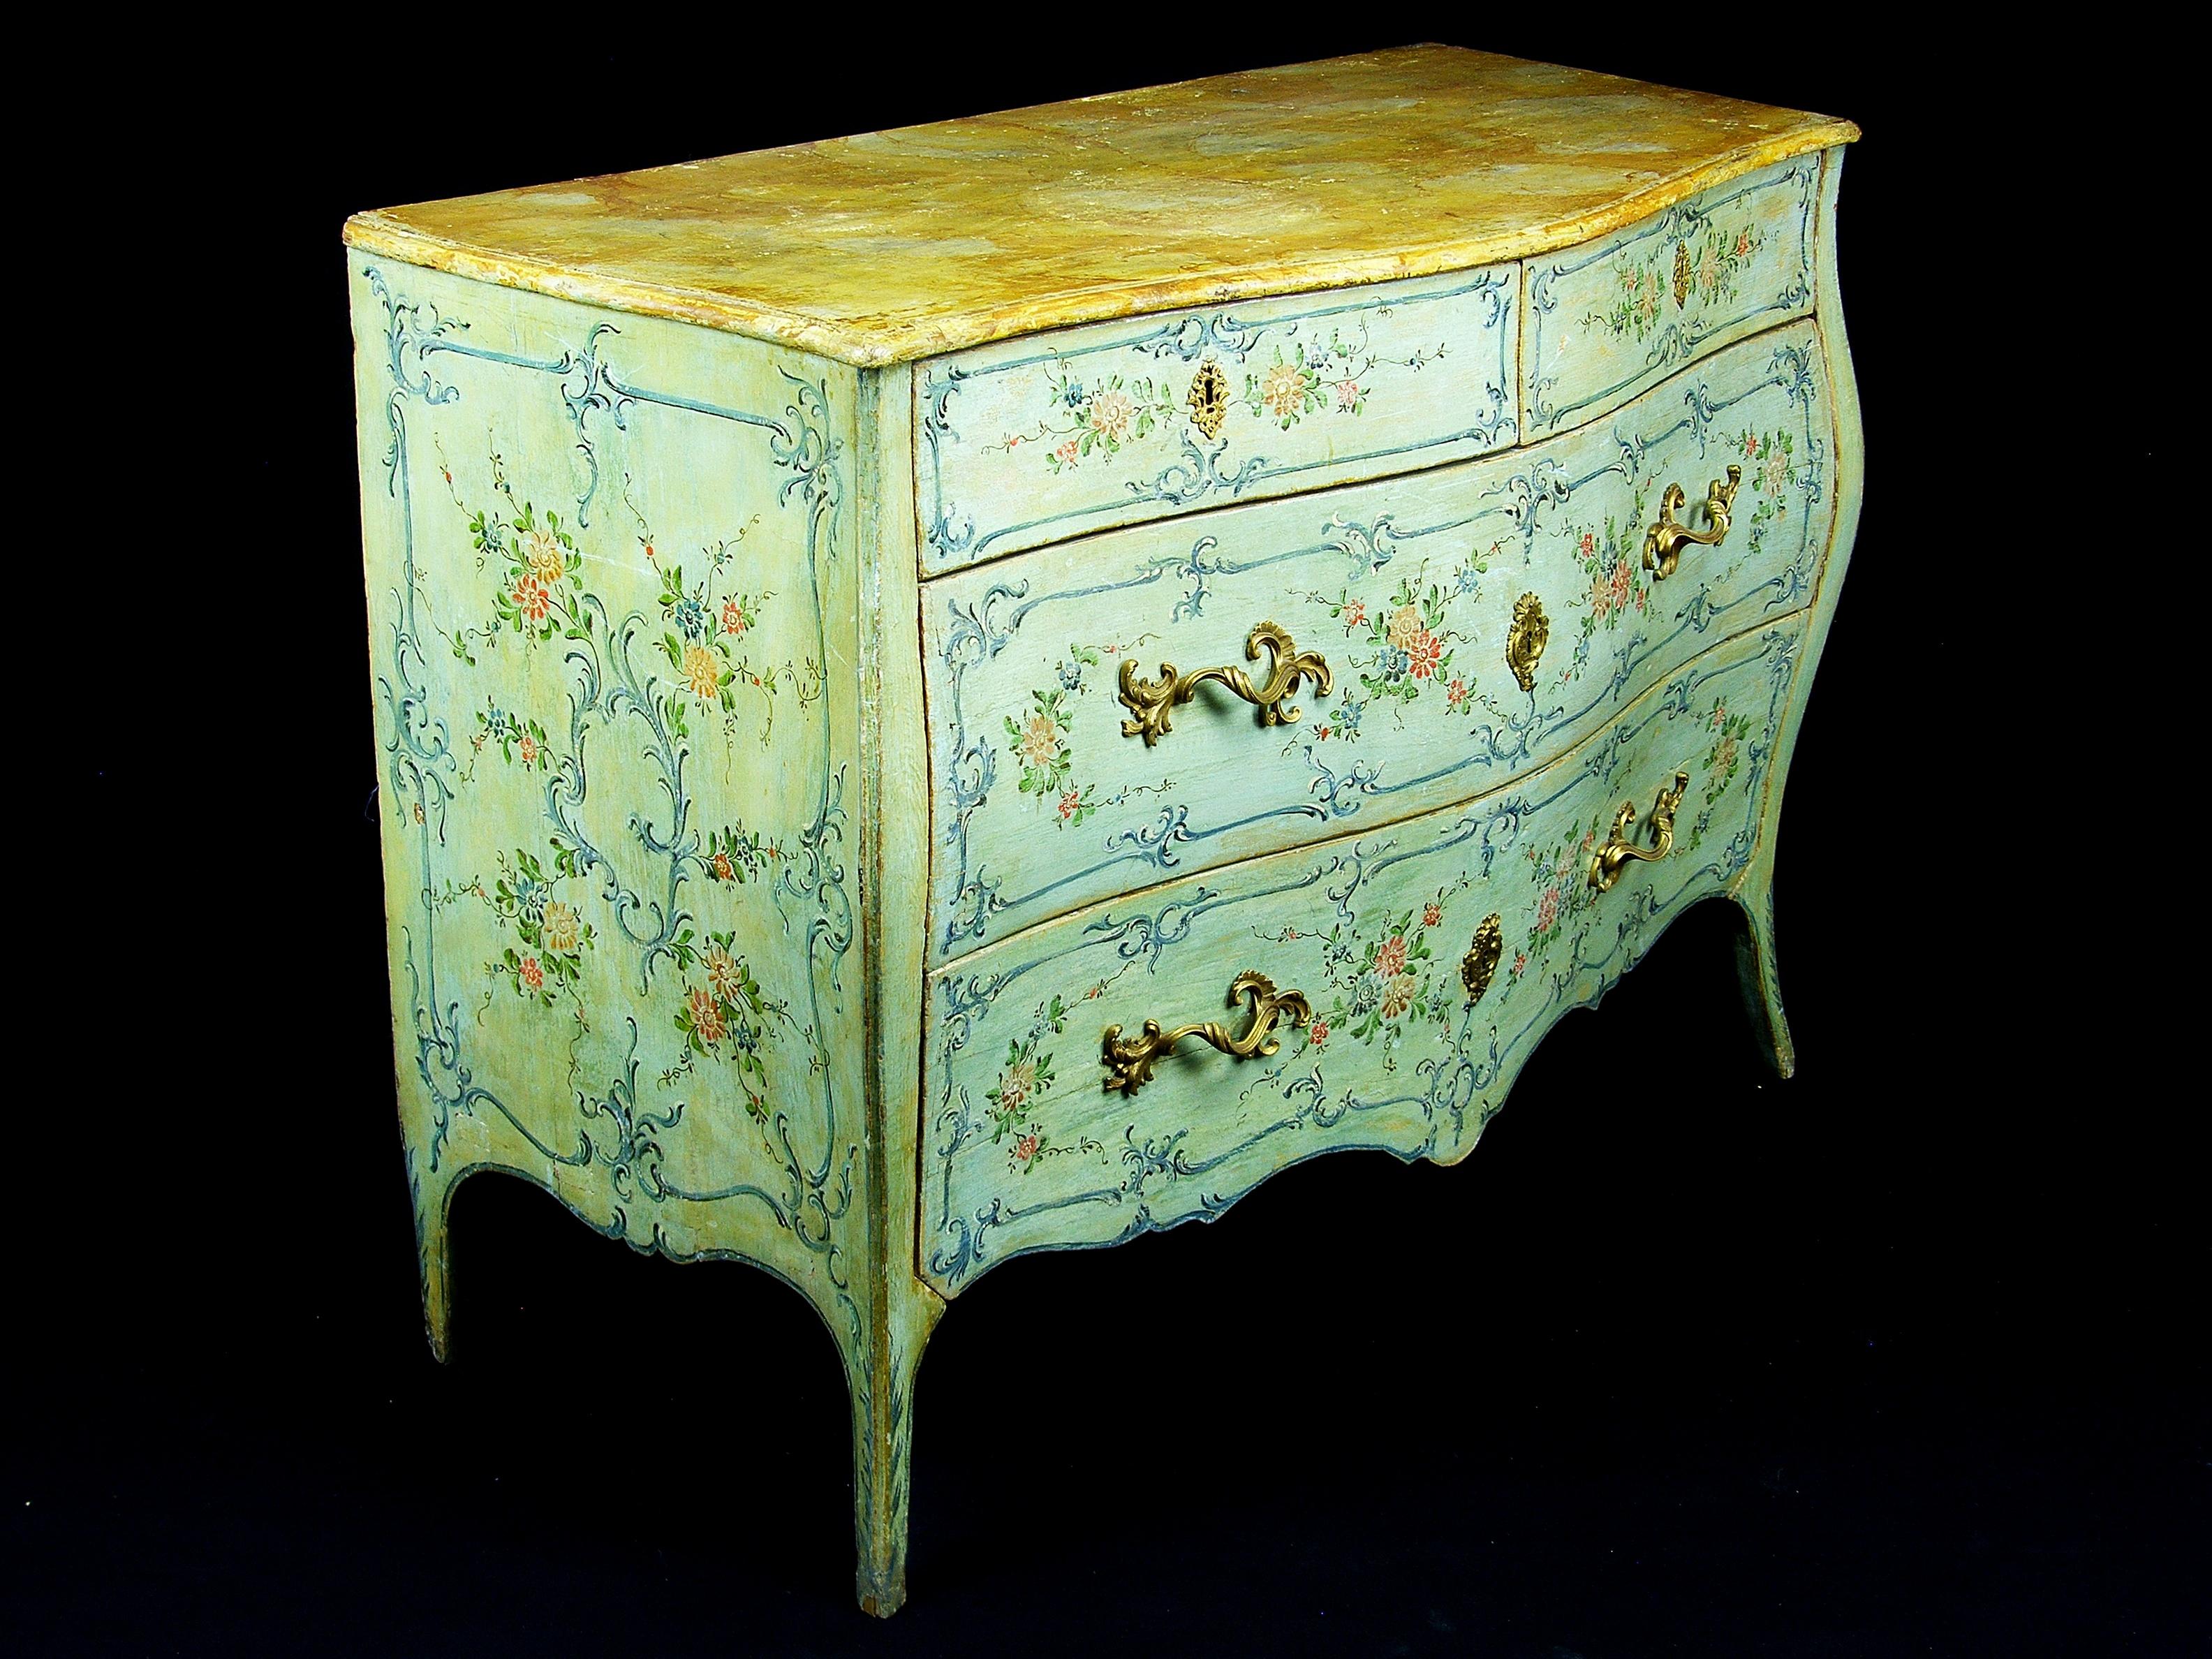 N.1 Polychrome lacquered wood Chest of Drawers with floral decorations, 18th century, Italy Genoa

Elegant Italian (Genoese) chest of drawers of the 18th century, made of lacquered wood in green-blue tones with polychrome floral decorations and